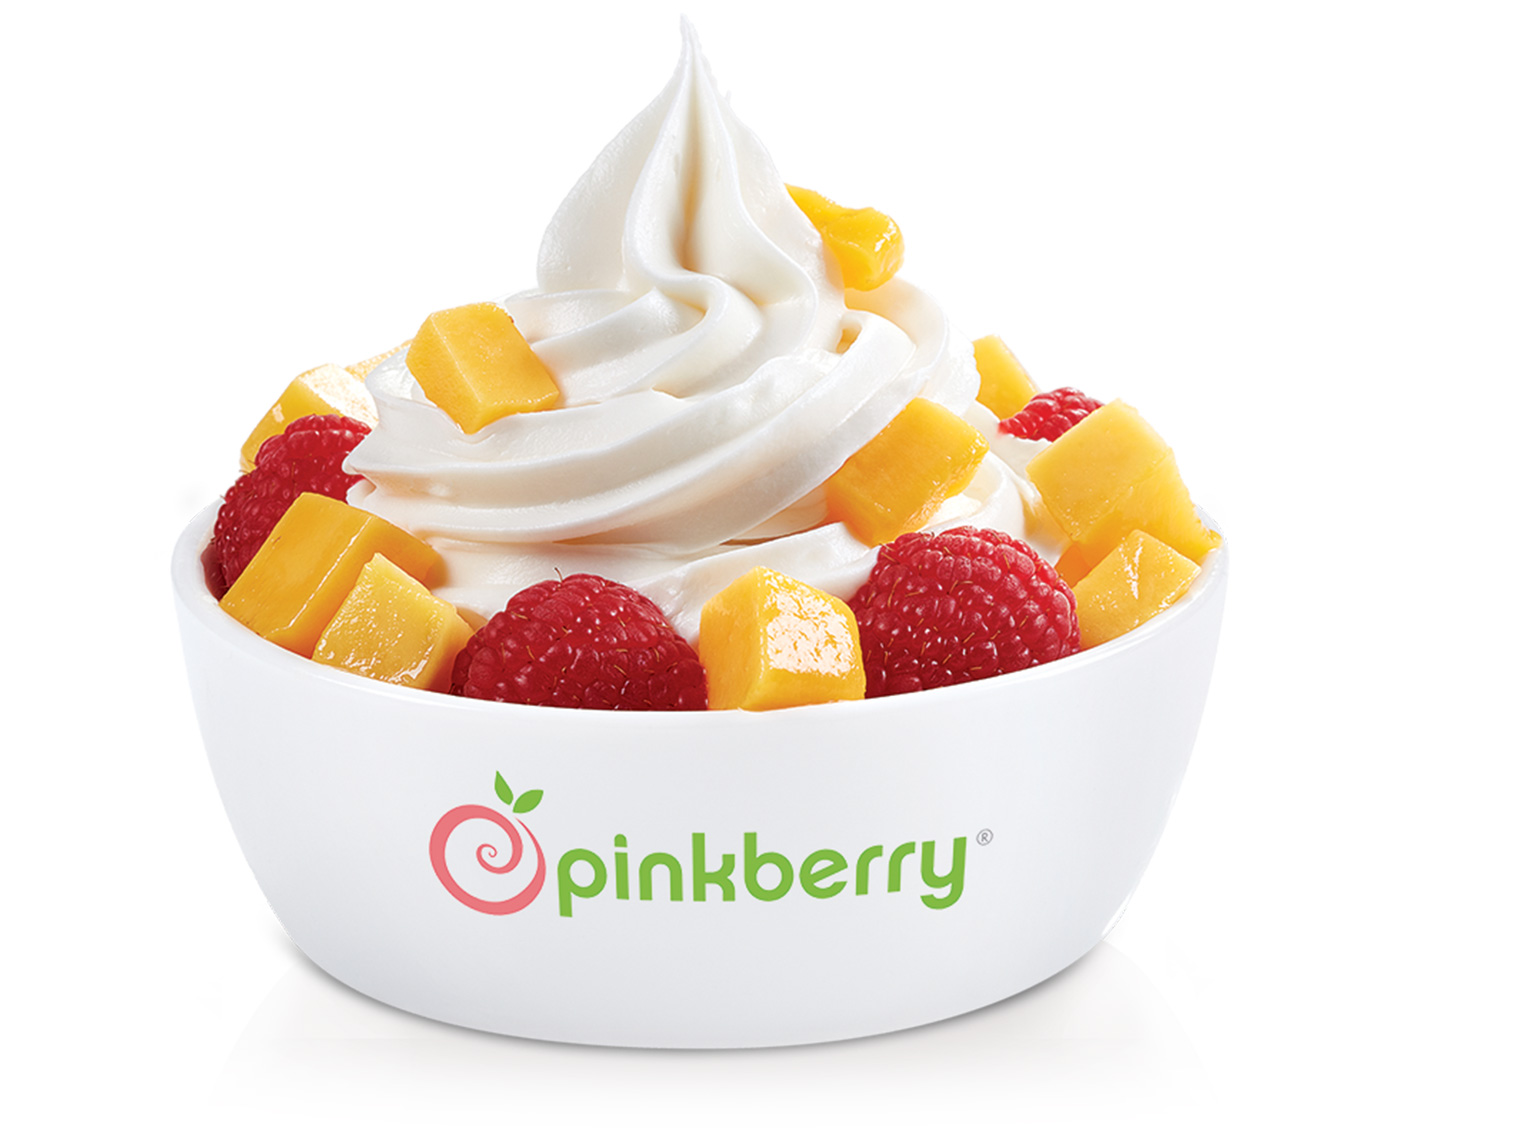 pinkberry product